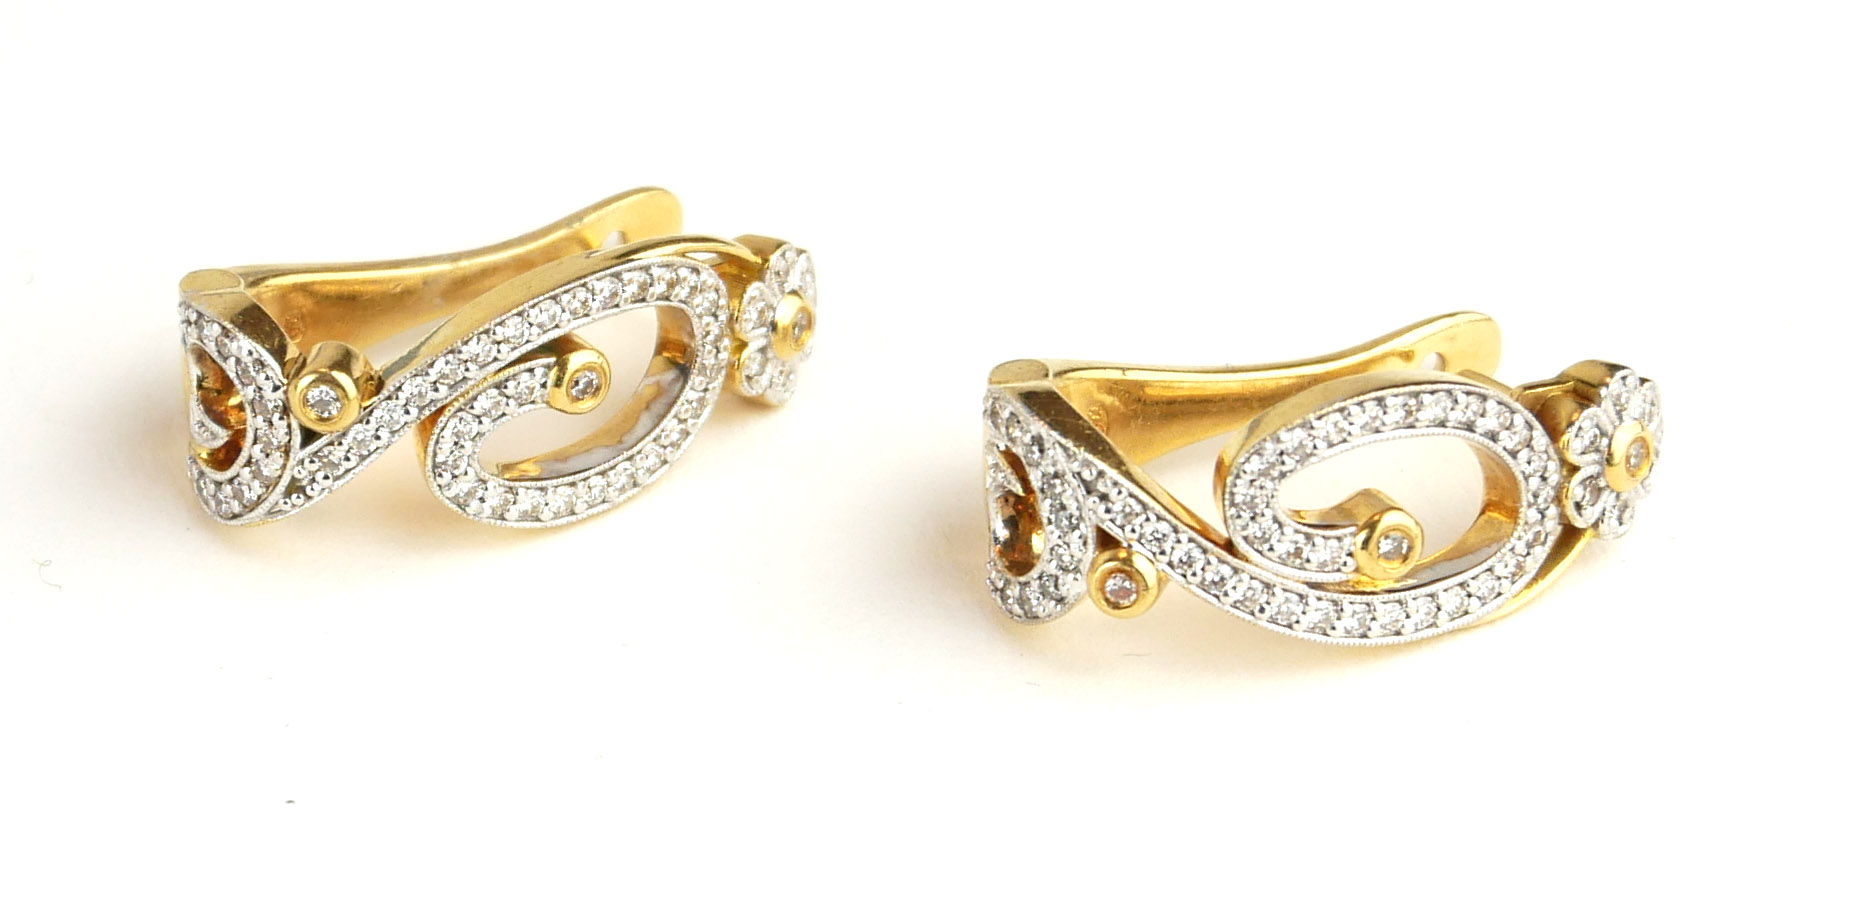 A PAIR OF 18CT GOLD AND DIAMOND EARRINGS Having a pavé set diamond scrolled design within a round